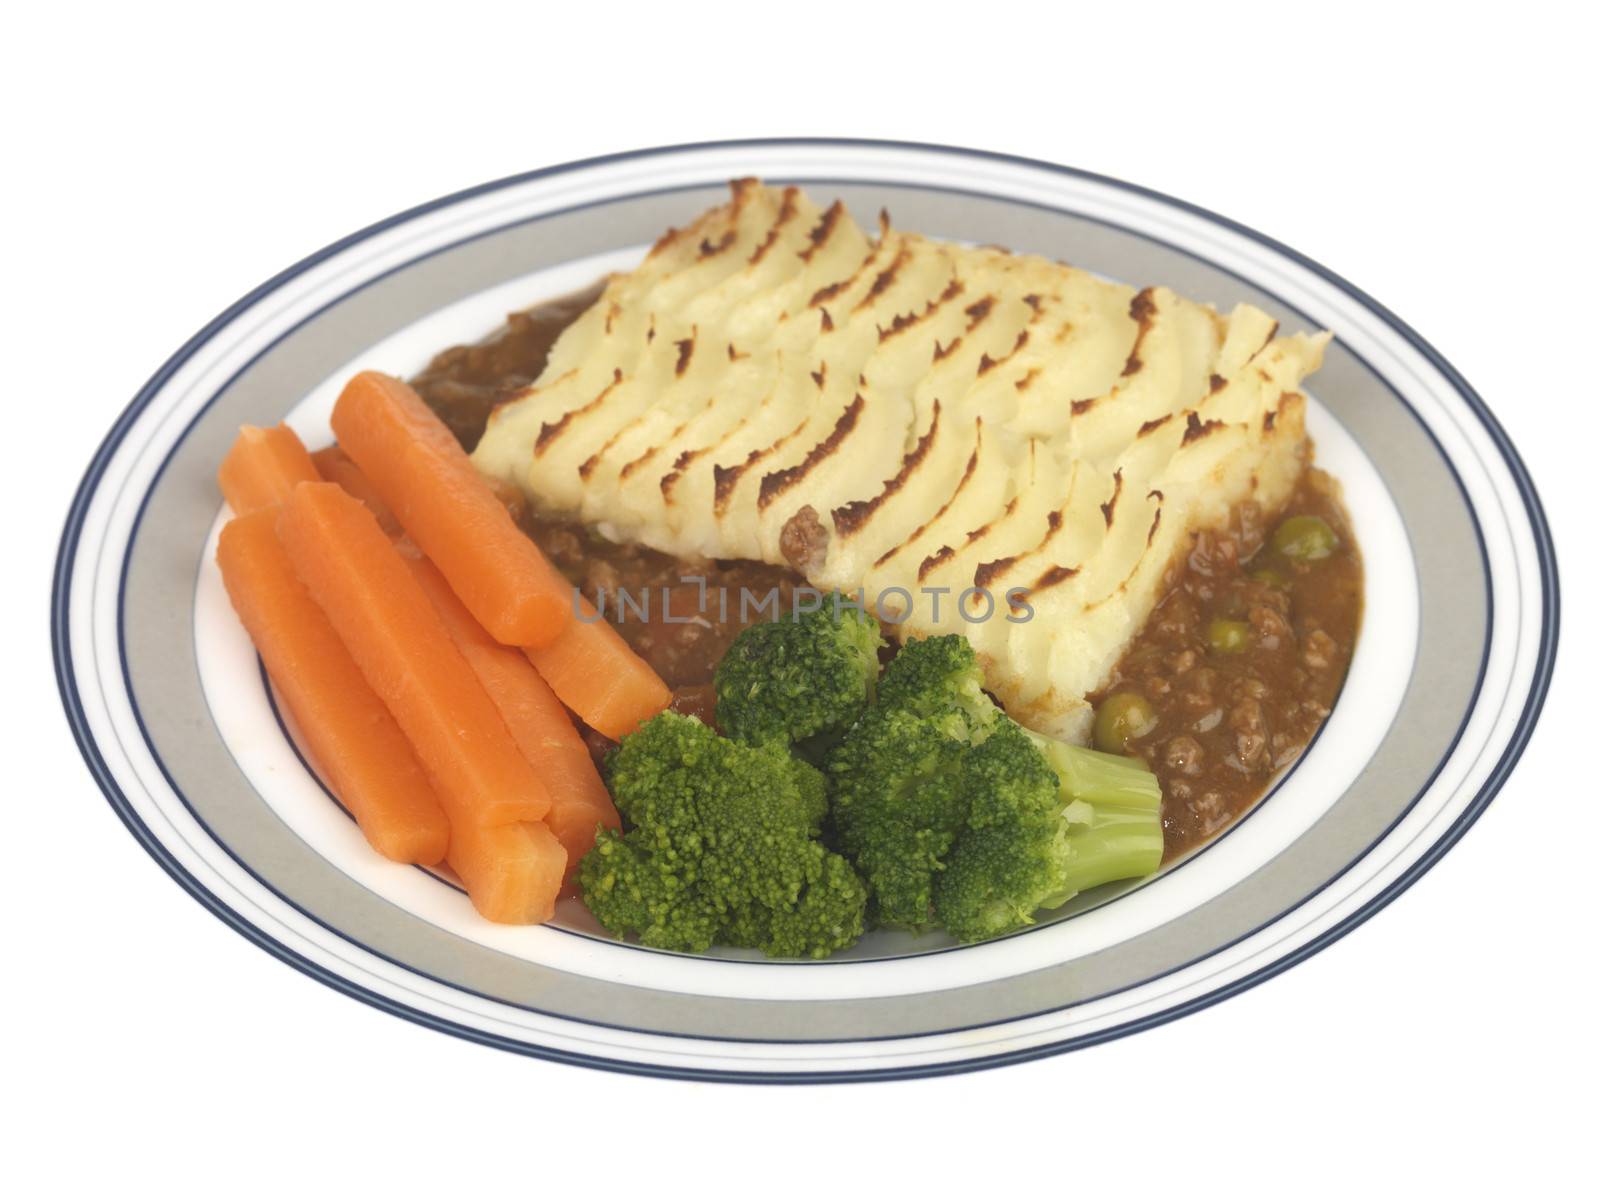 Cottage Pie with Vegetables by Whiteboxmedia